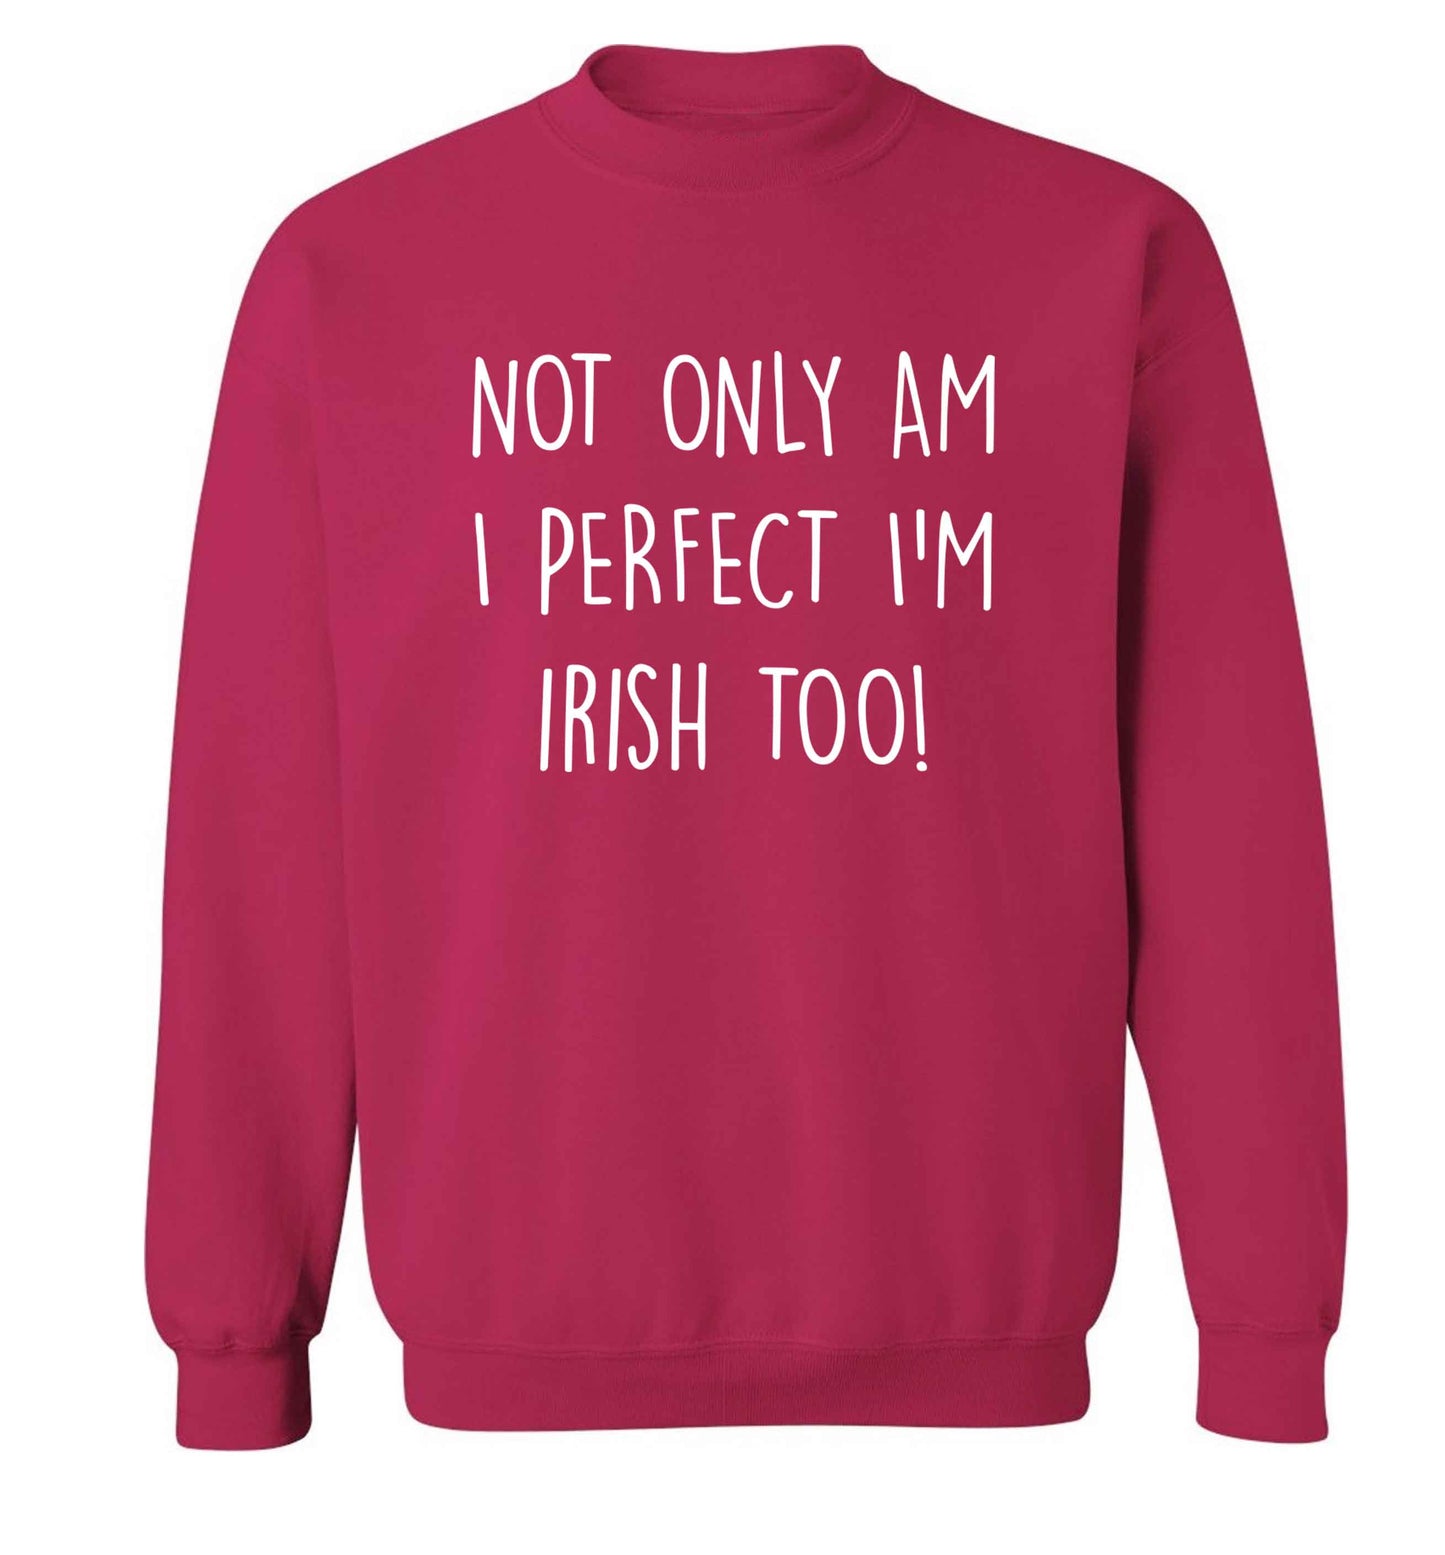 Not only am I perfect I'm Irish too! adult's unisex pink sweater 2XL